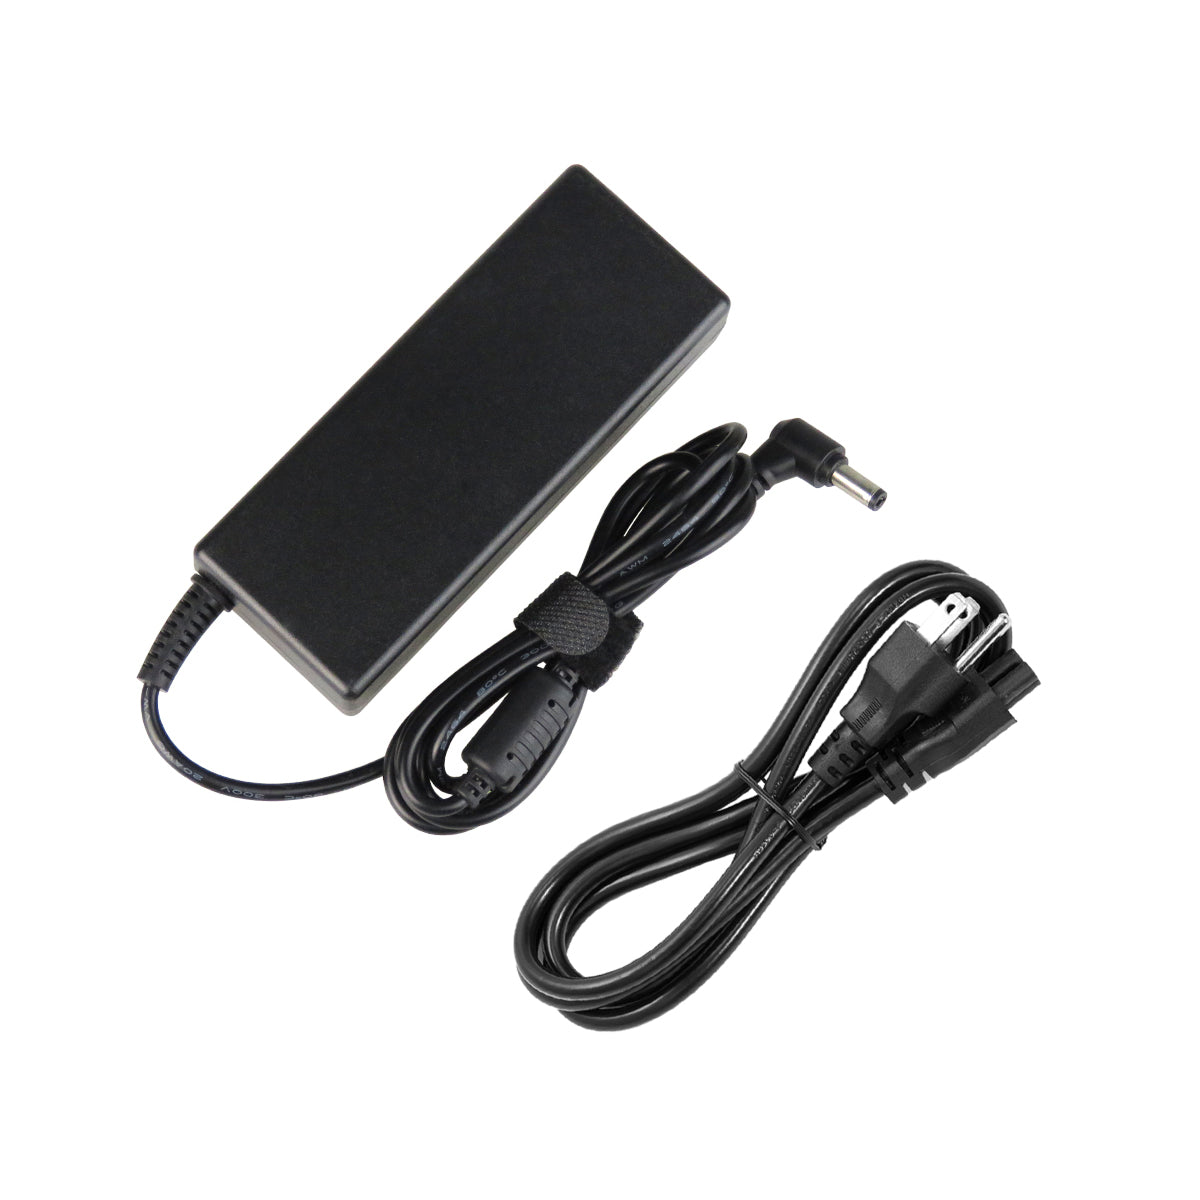 AC Adapter Charger for Toshiba Satellite l55-a5284nr Notebook.